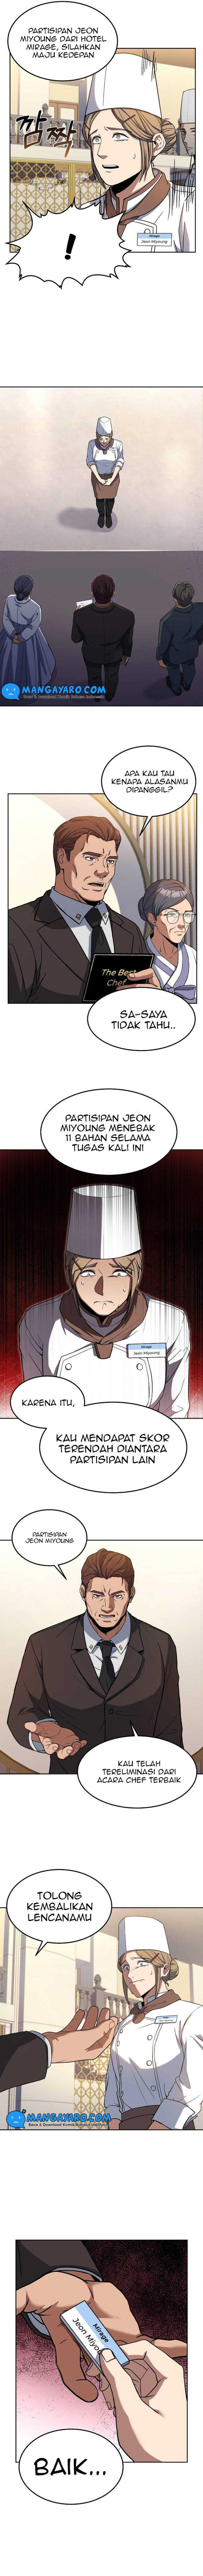 Youngest Chef From the 3rd Rate Hotel Chapter 40